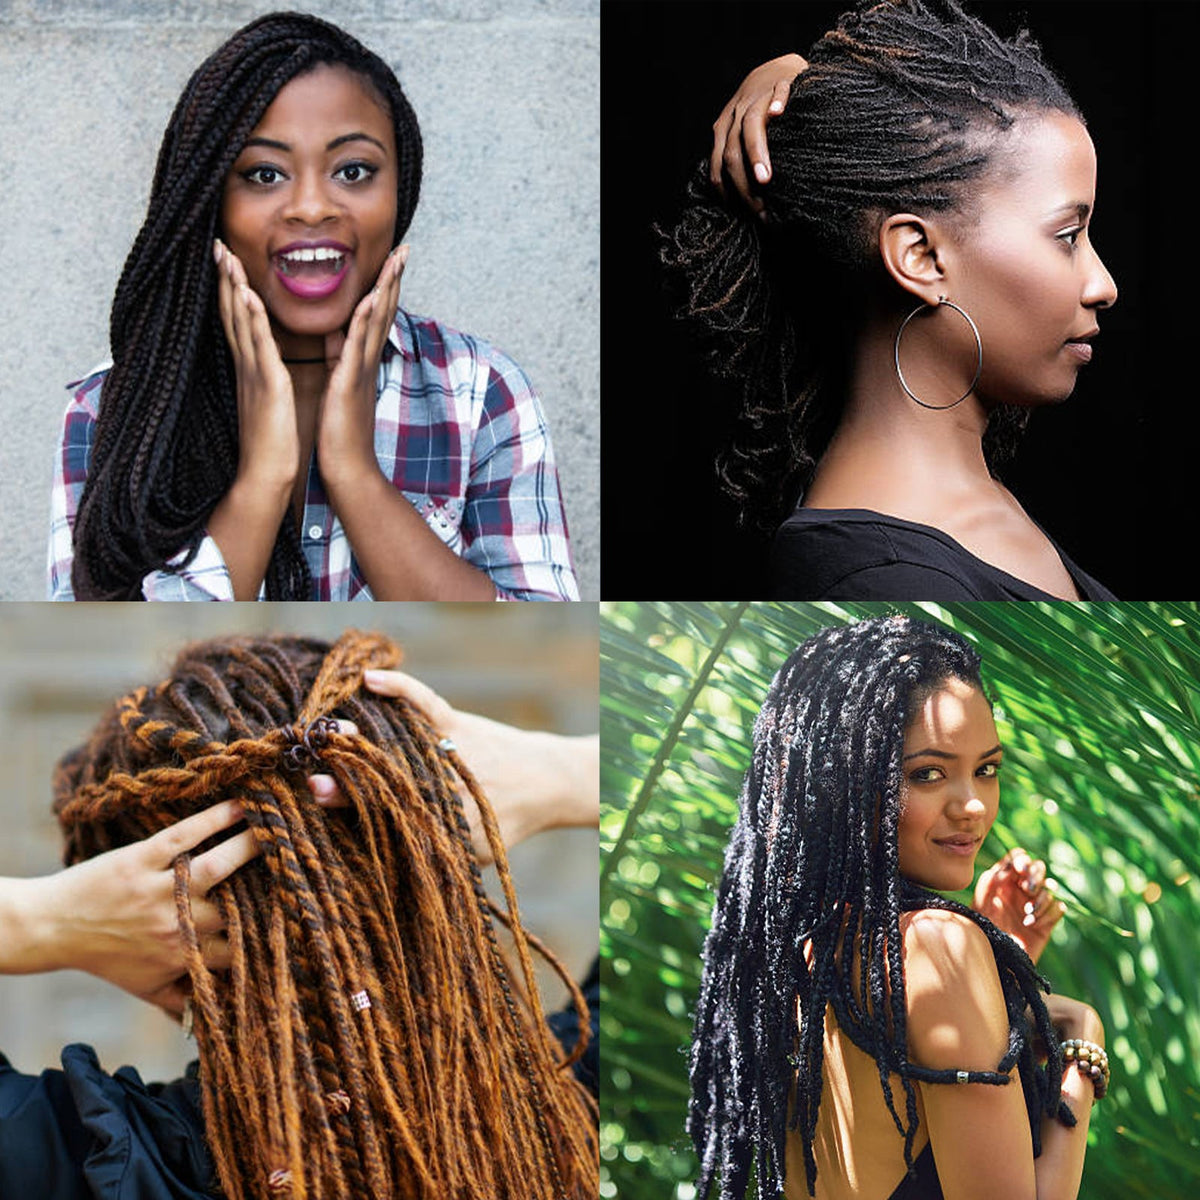 100% Human Hair Dreadlock Extensions 16Inch 10 Strands Handmade Natural Loc Extensions Human Hair Bundle Dreads Extensions For Woman&Men Can be Dyed & Bleached Natural Black 16inch length 0.6cm Width